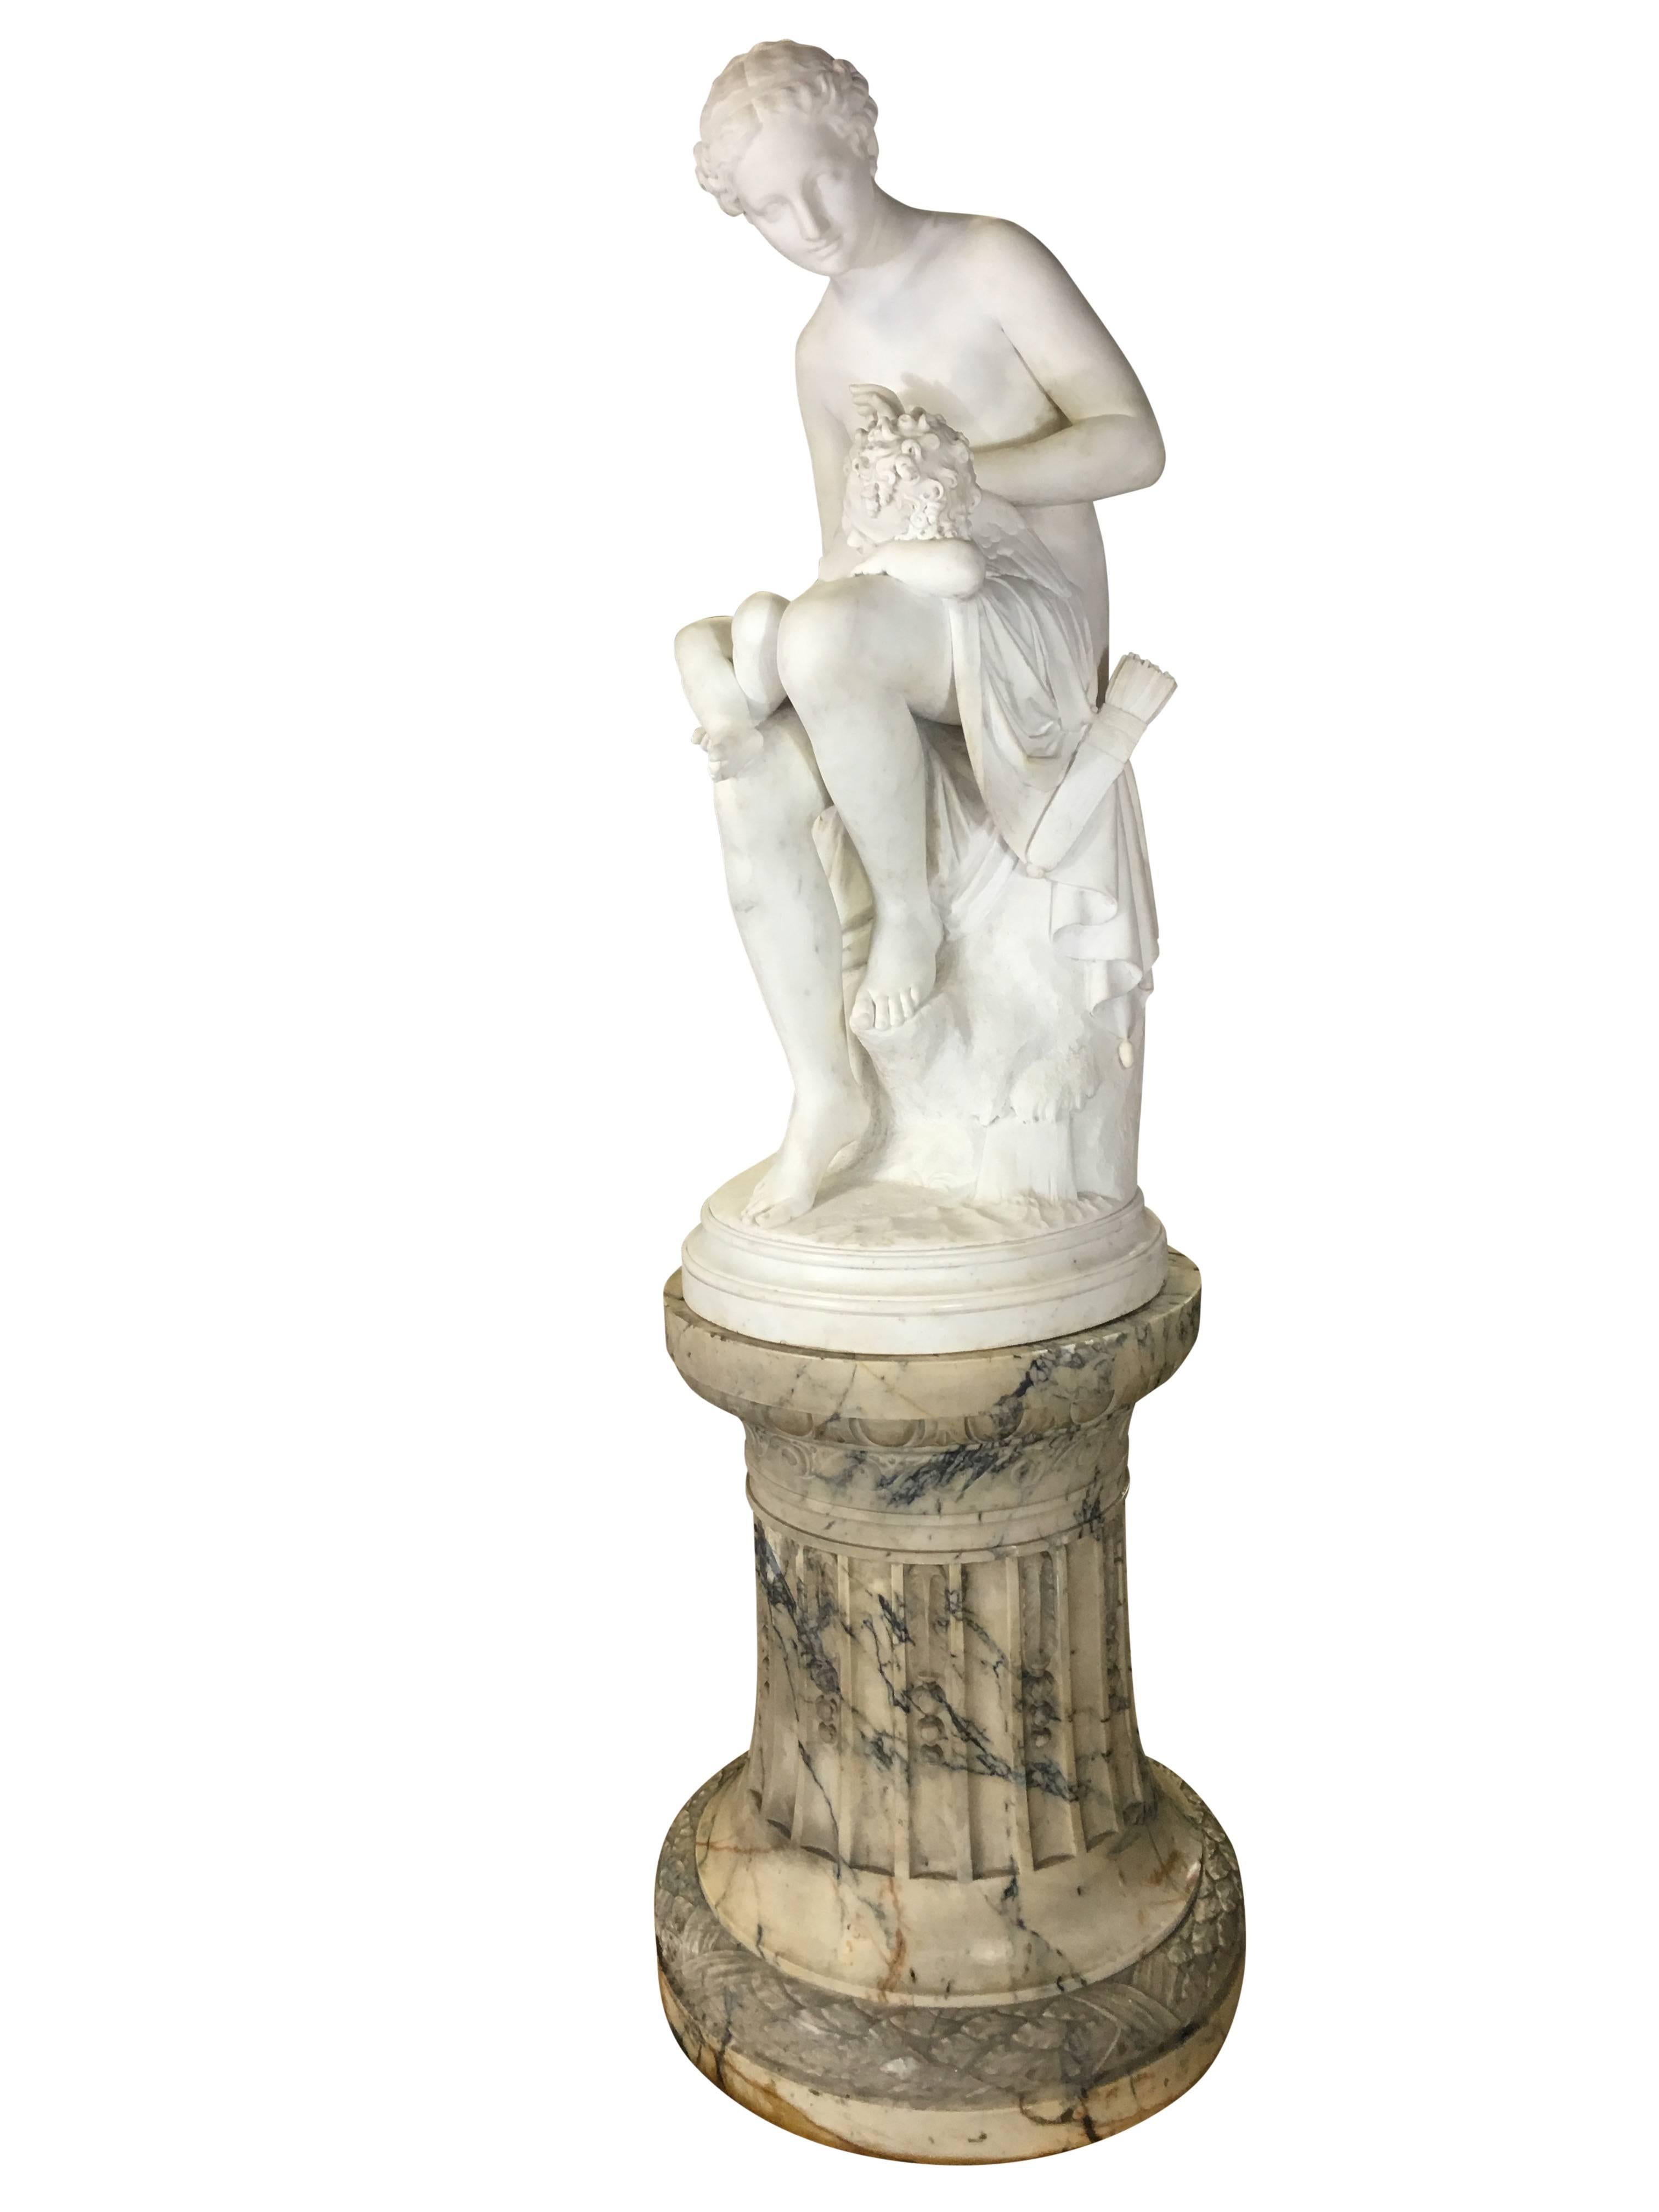  Guillaume Geefs (1805-1883)
Venus Clipping Cupids Wings
Royal Sculptor of Belgium, 1832
Palace size marble sculpture of a seated draped Venus on the stump of oak tree, with scissors in her right hand and cupid resting on her lap.
Complete with the